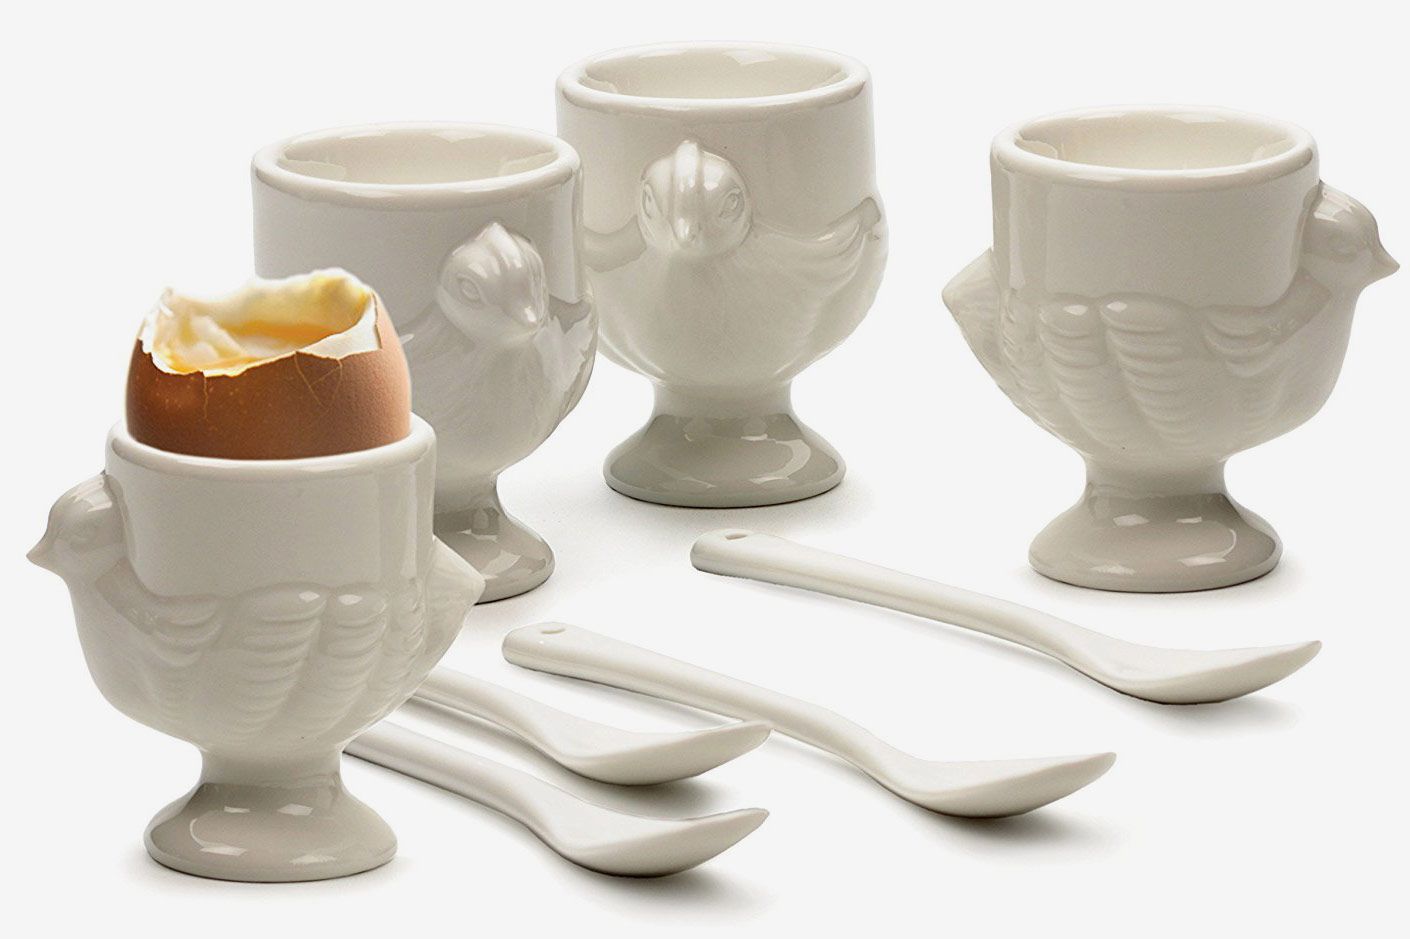 Titulaires Egg Cup Stand Cute Boiled Egg Serving Cups for Home Kitchen SHANGJ 4pcs Silicone Egg Cup 